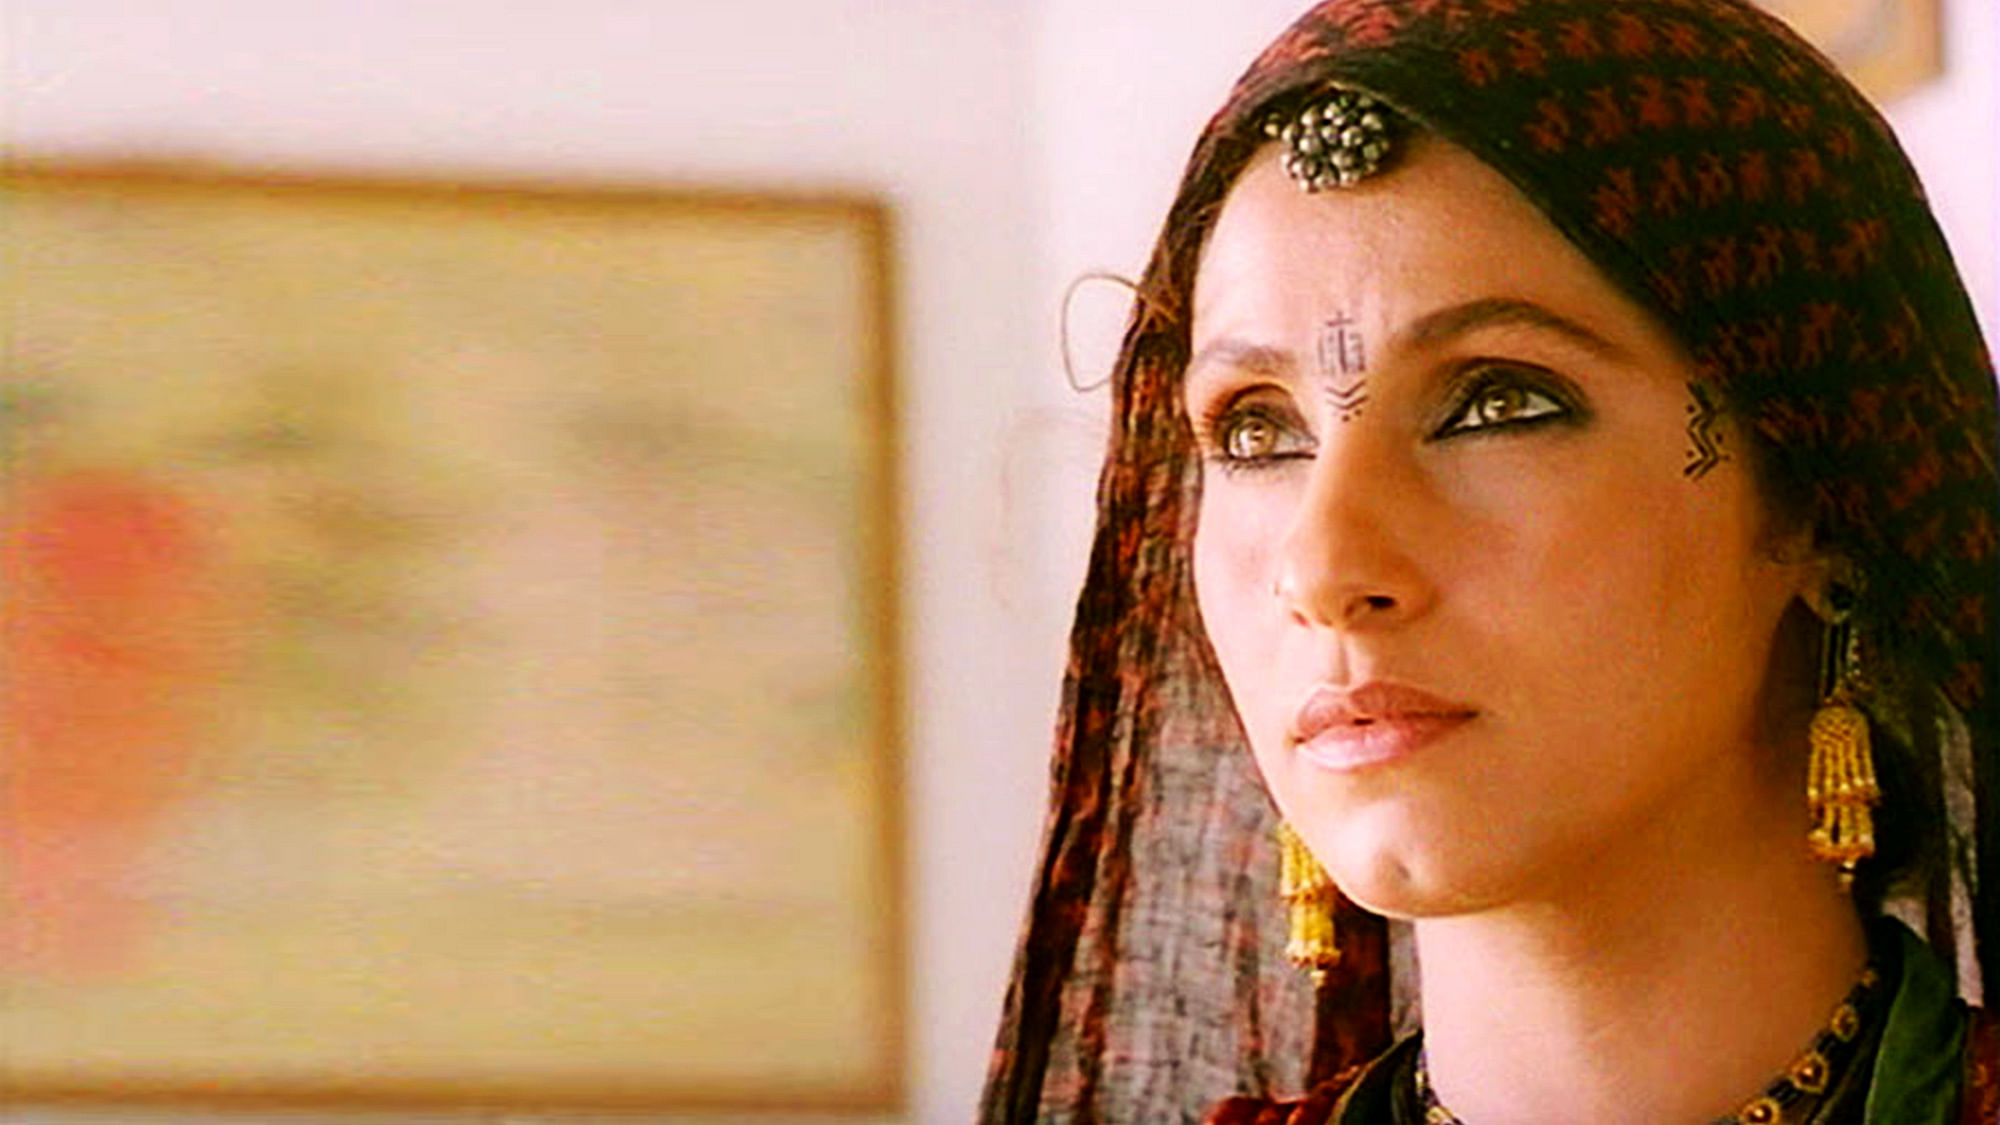 Directed by Kalpana Lajmi, Dimple Kapadia played the leading role in <i>Rudaali. T</i>he film was based on Mahasweta Devi’s short stories. (Photo: <b>The Quint</b>)